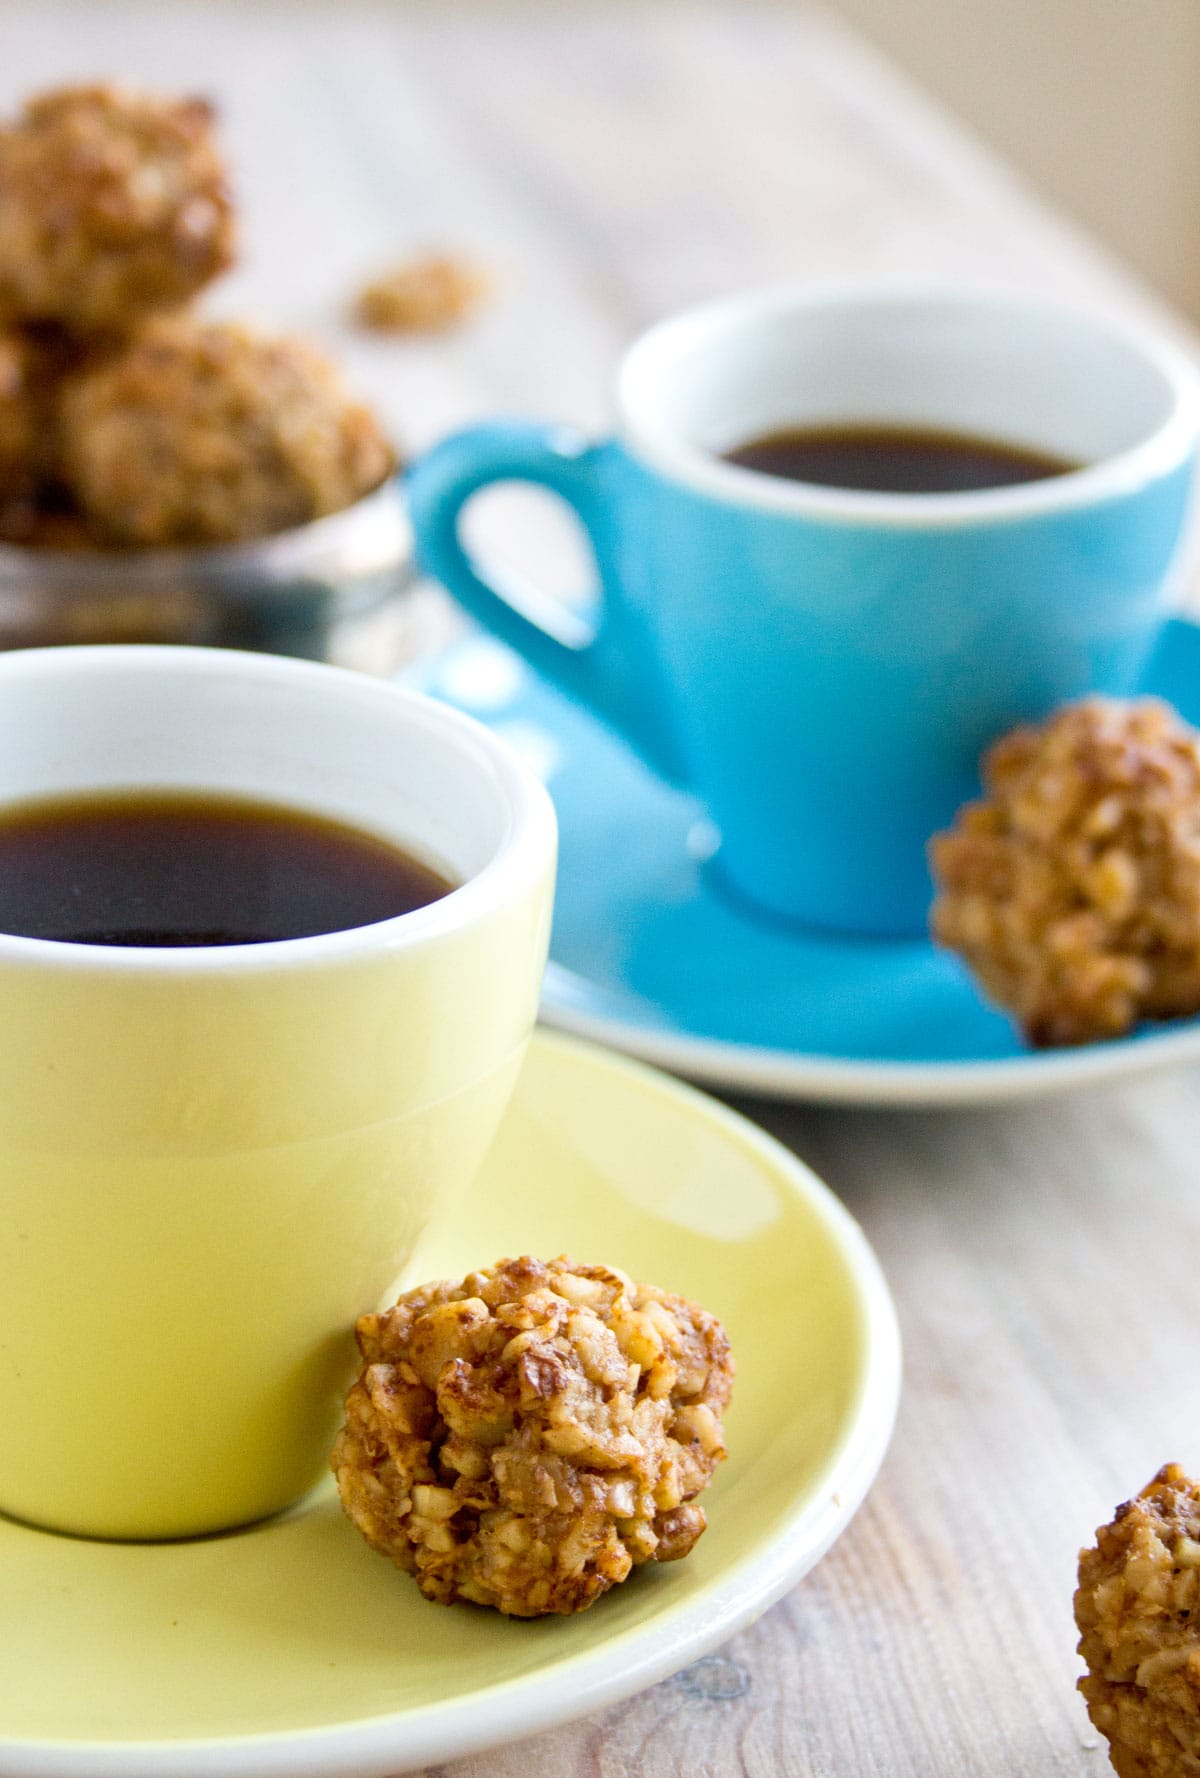 A walnut cookie on a saucer with an espresso cup.